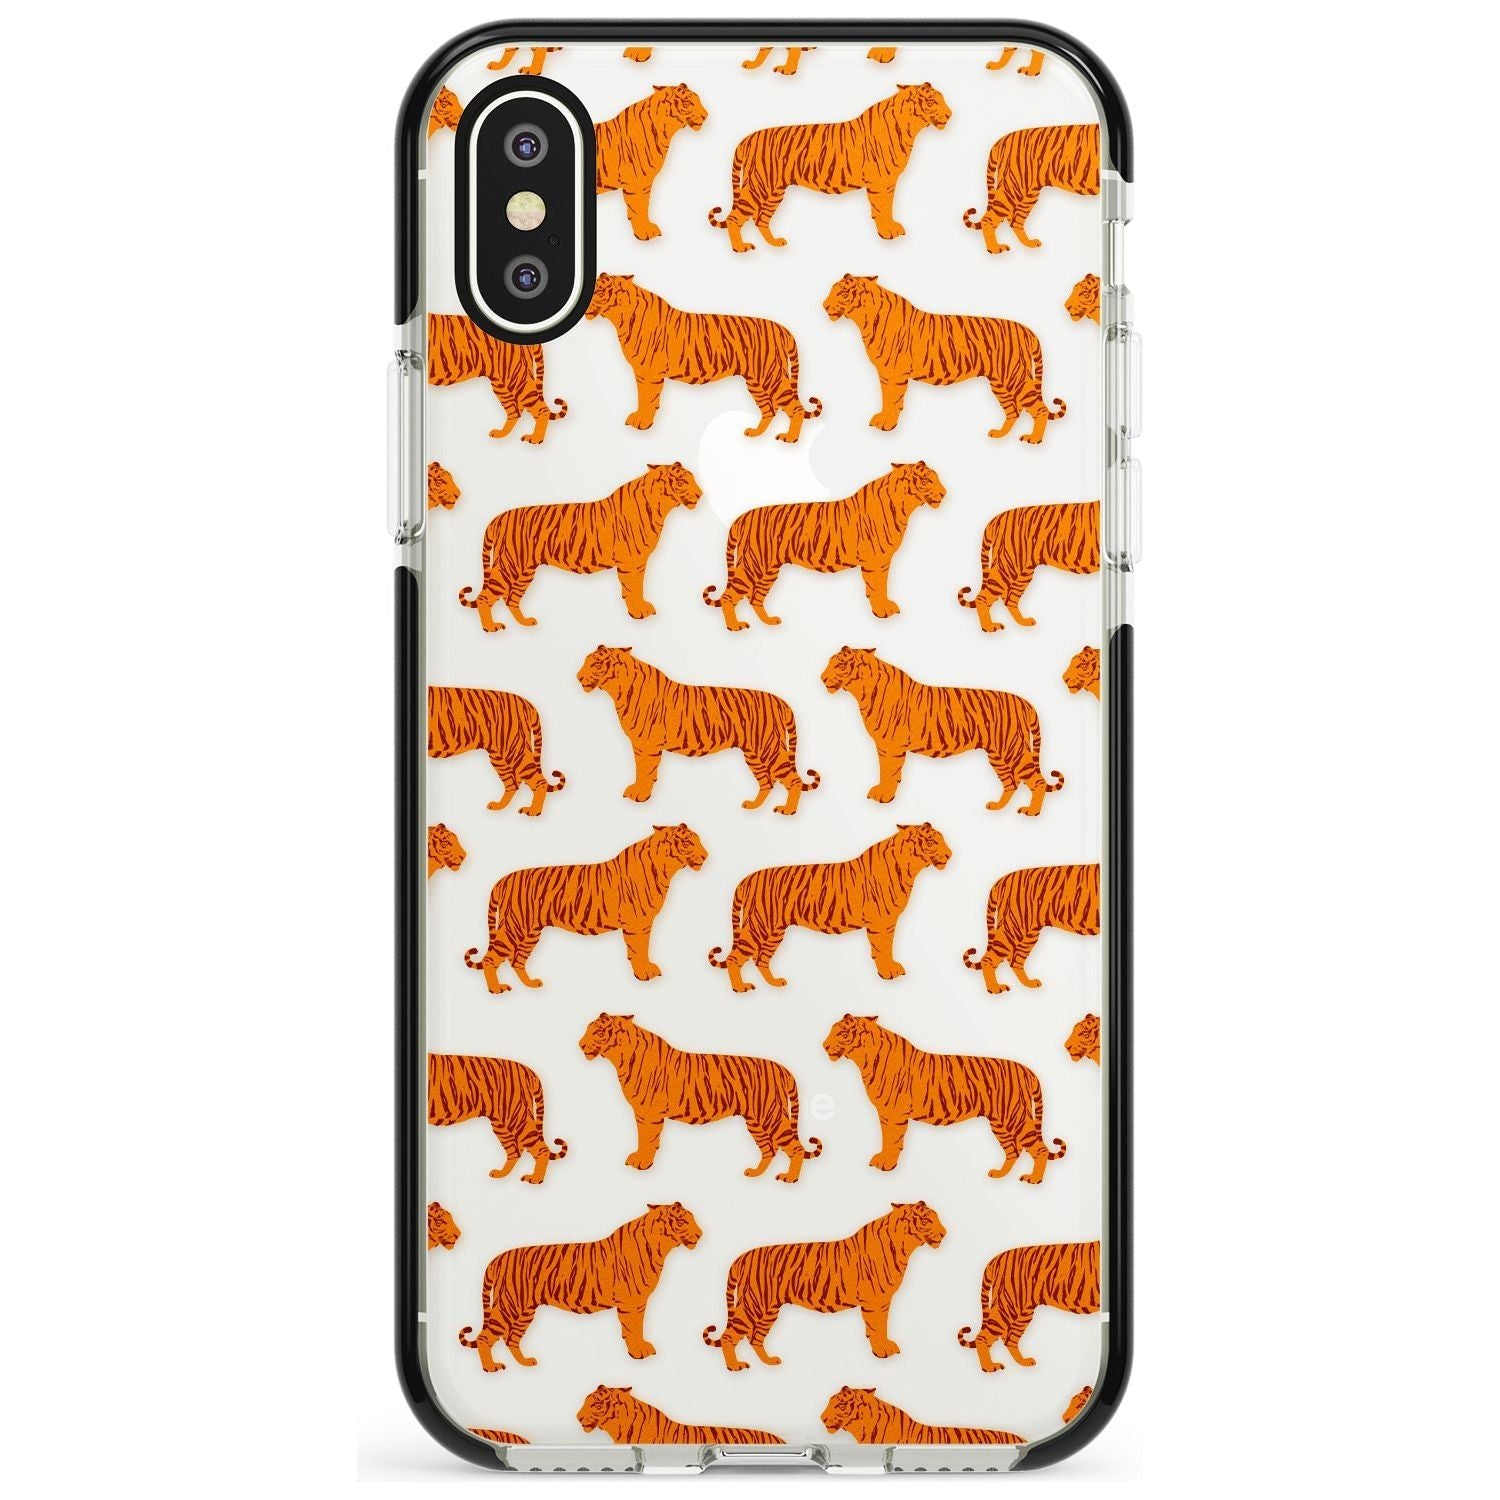 Tigers on Clear Pattern Black Impact Phone Case for iPhone X XS Max XR